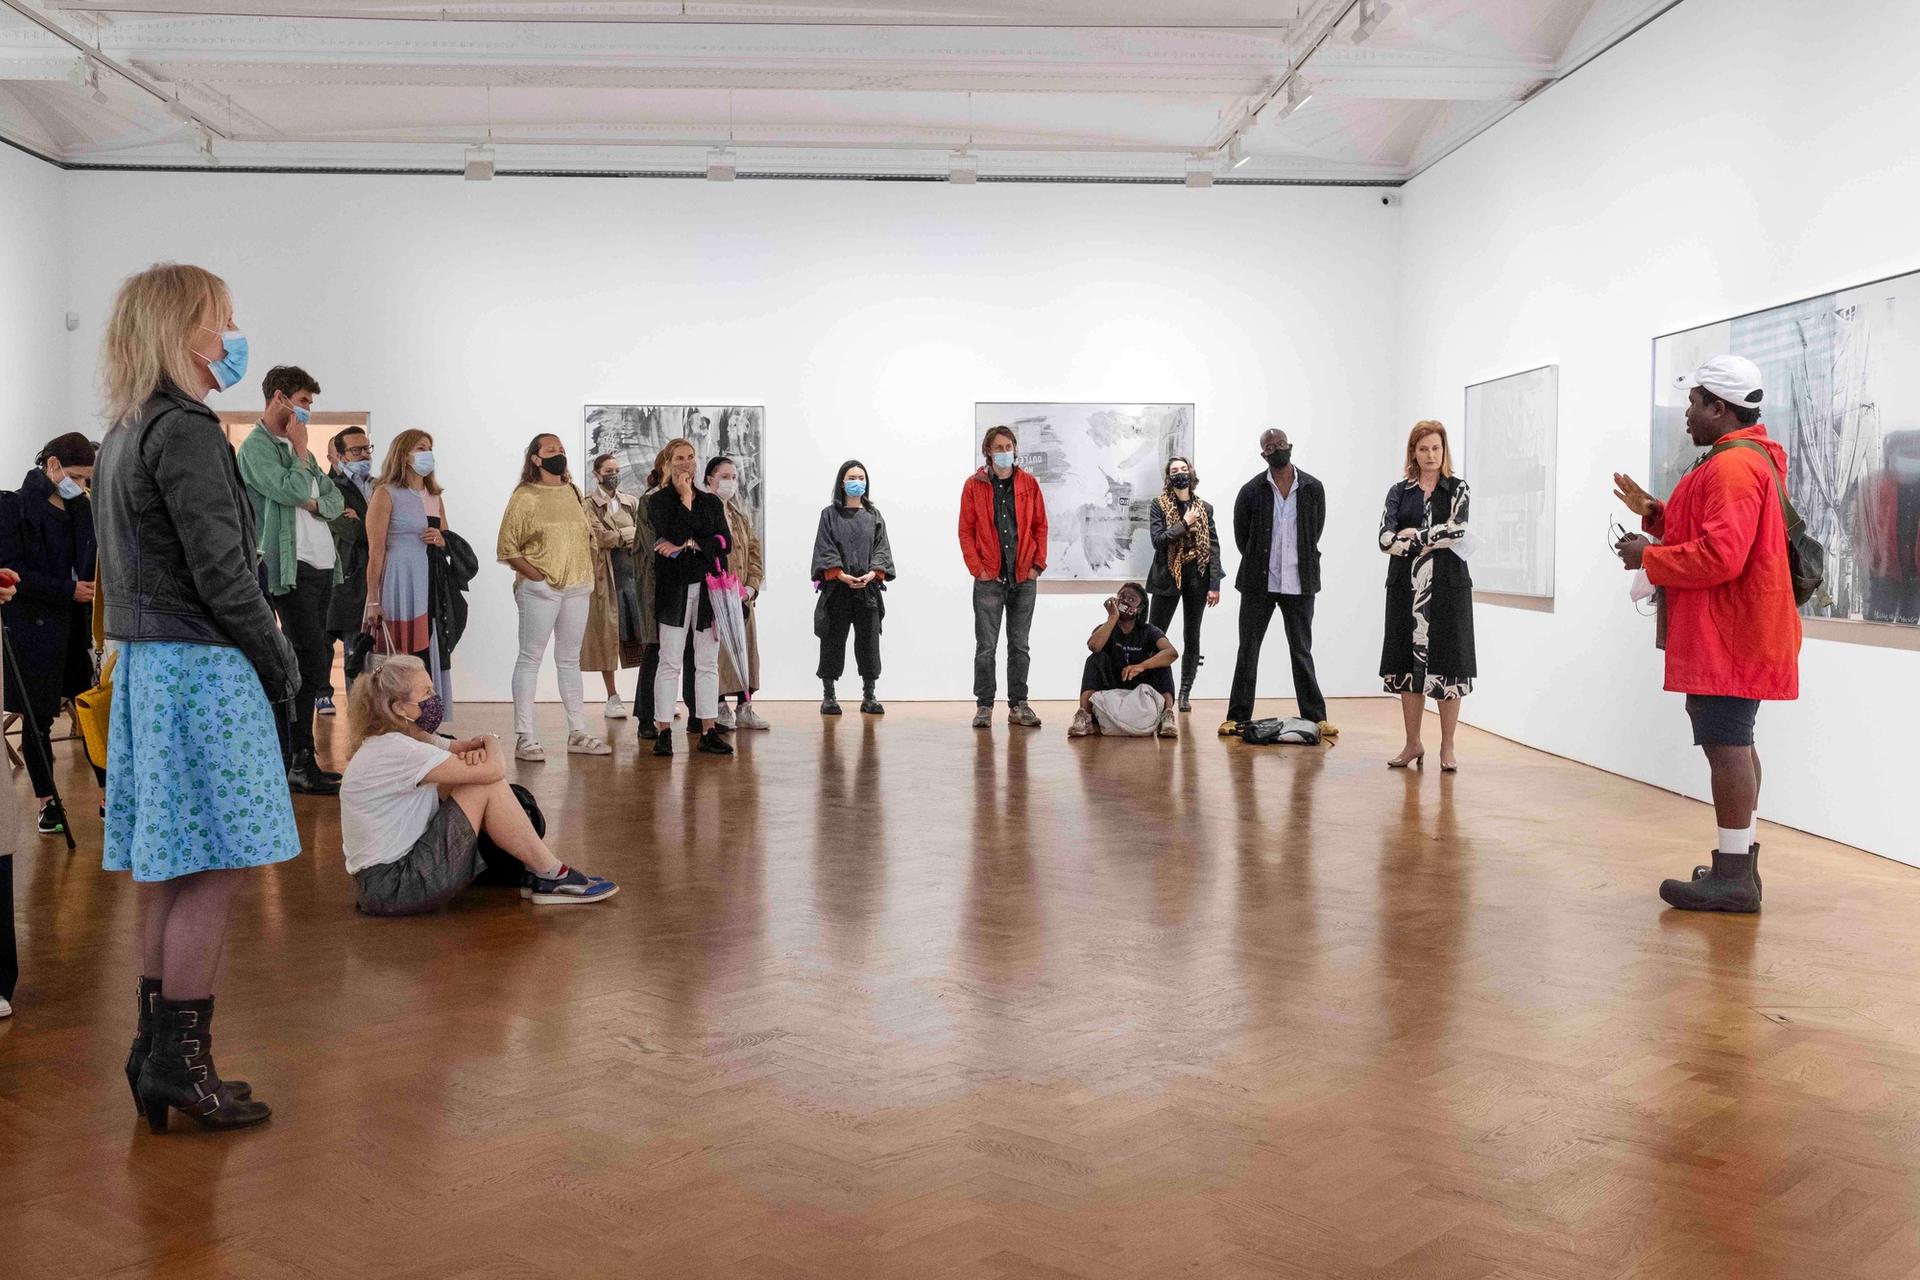 Travel grants from Art Fund will allow curators from regional UK galleries to attend London Gallery Weekend events, such as this talk at the Robert Rauschenberg exhibition at Thaddaeus Ropac last year Photo: Linda Nylind